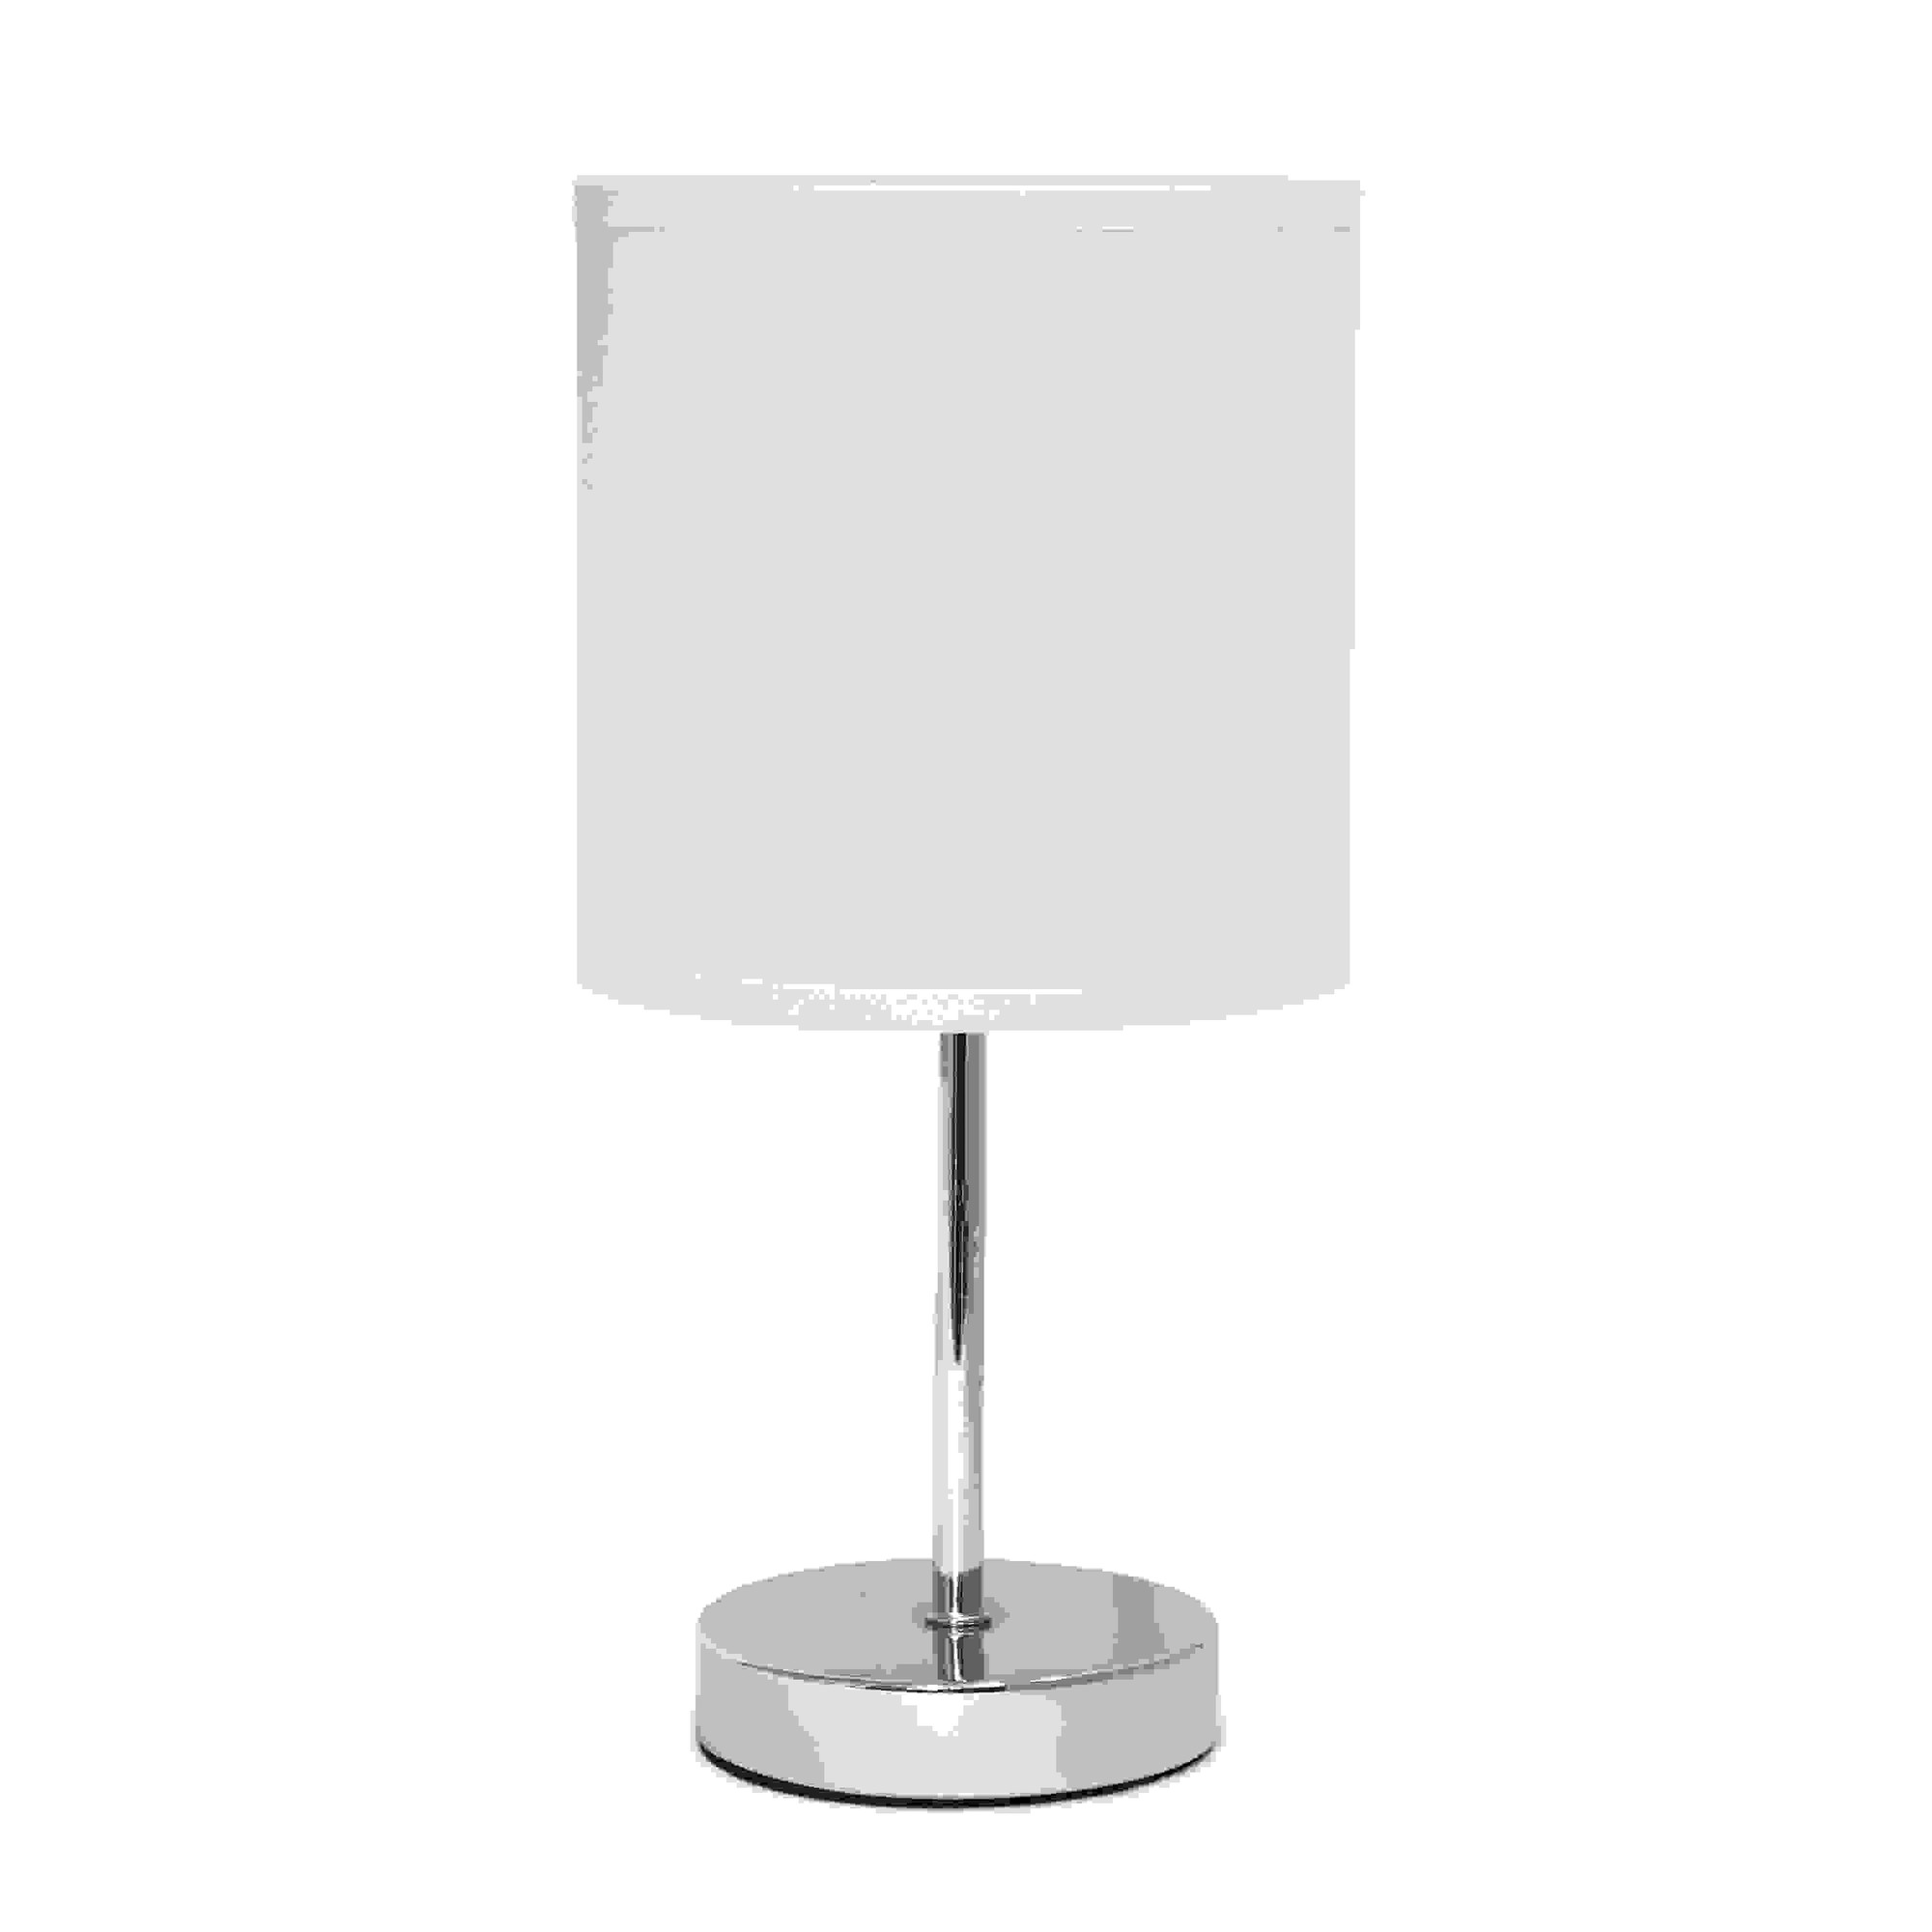 Simple Designs Chrome Mini Basic Table Lamp with Fabric Shade, Blush Pink